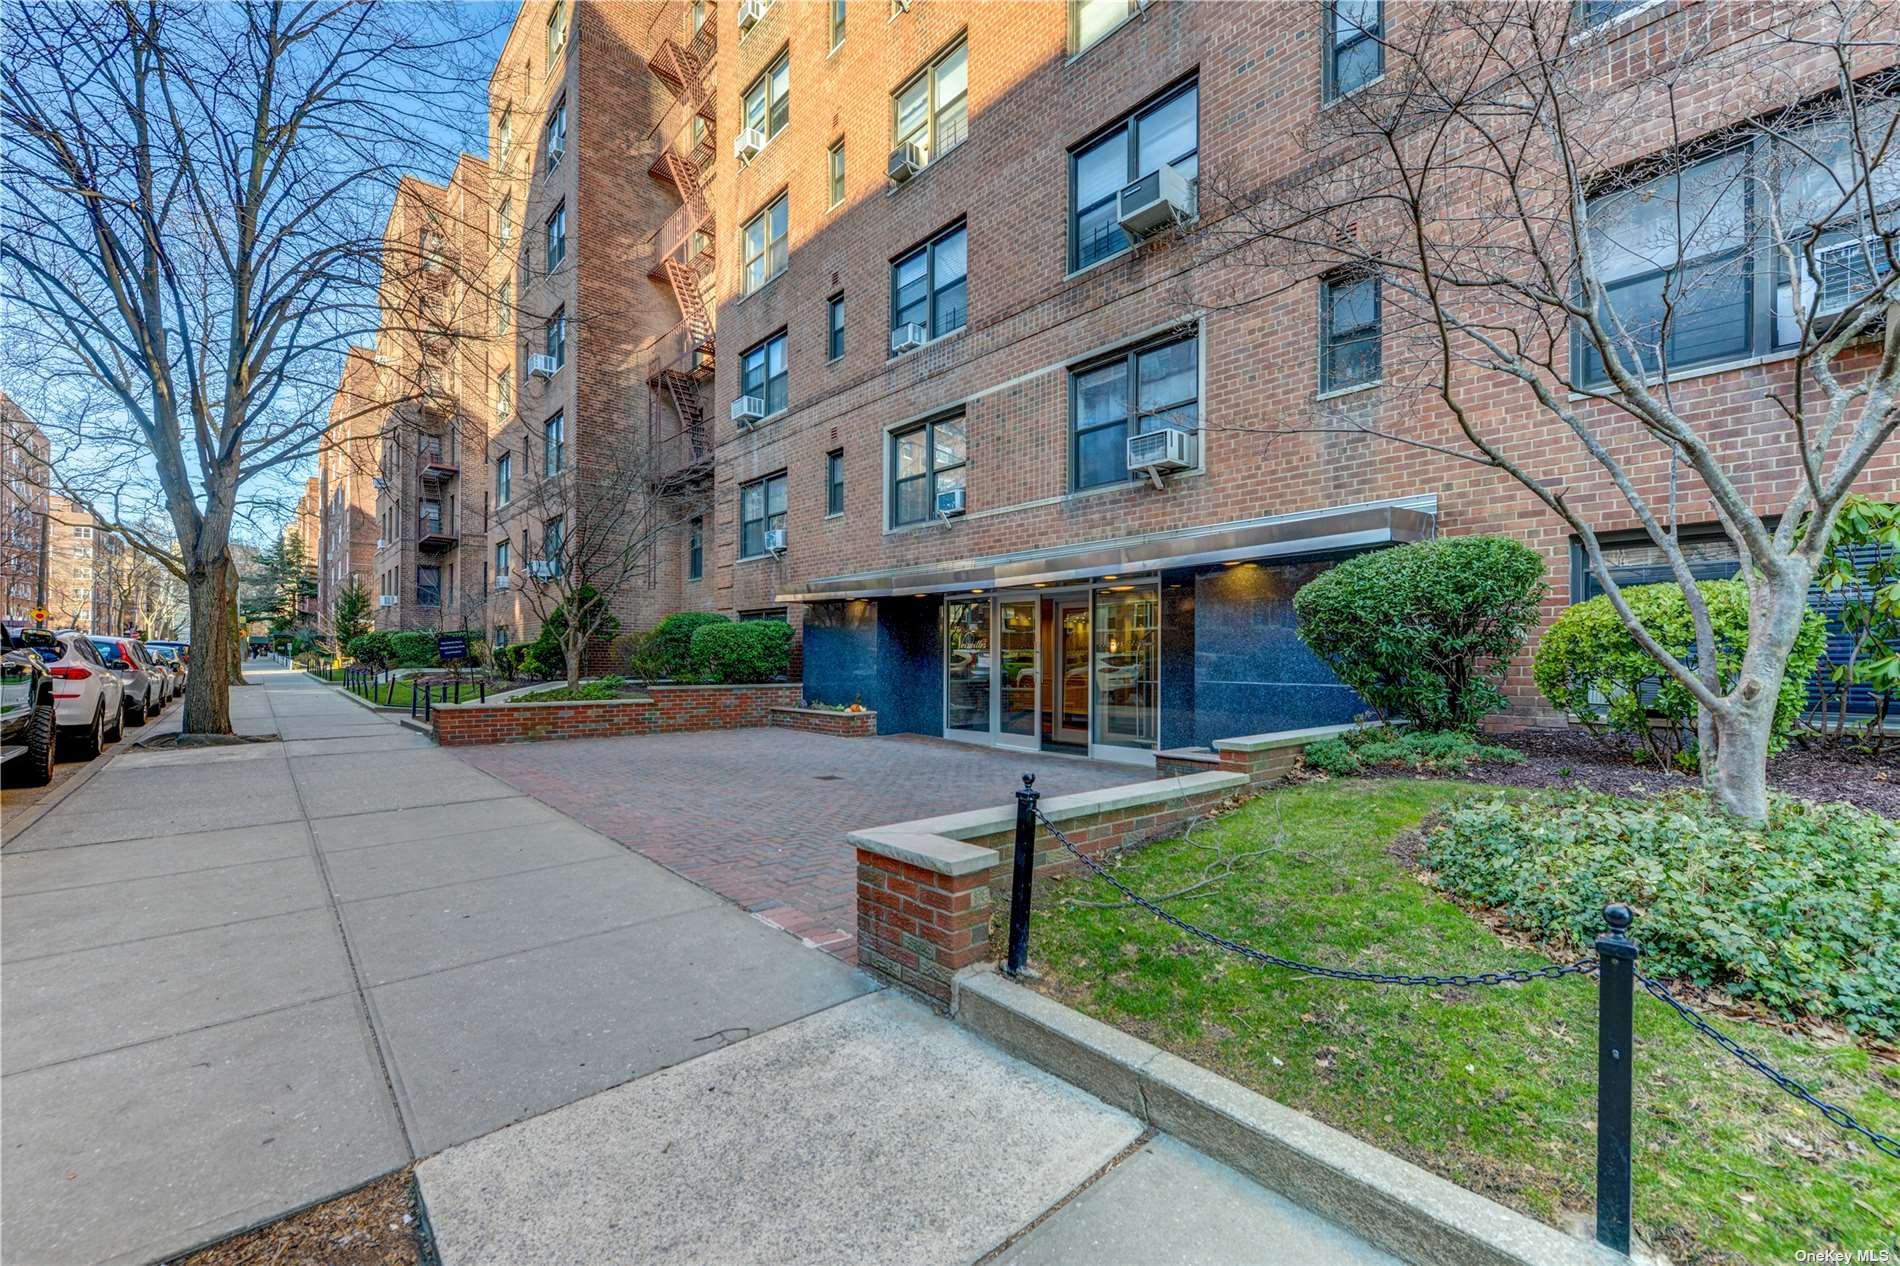 110-45 71st Road #3N in Queens, Forest Hills, NY 11375